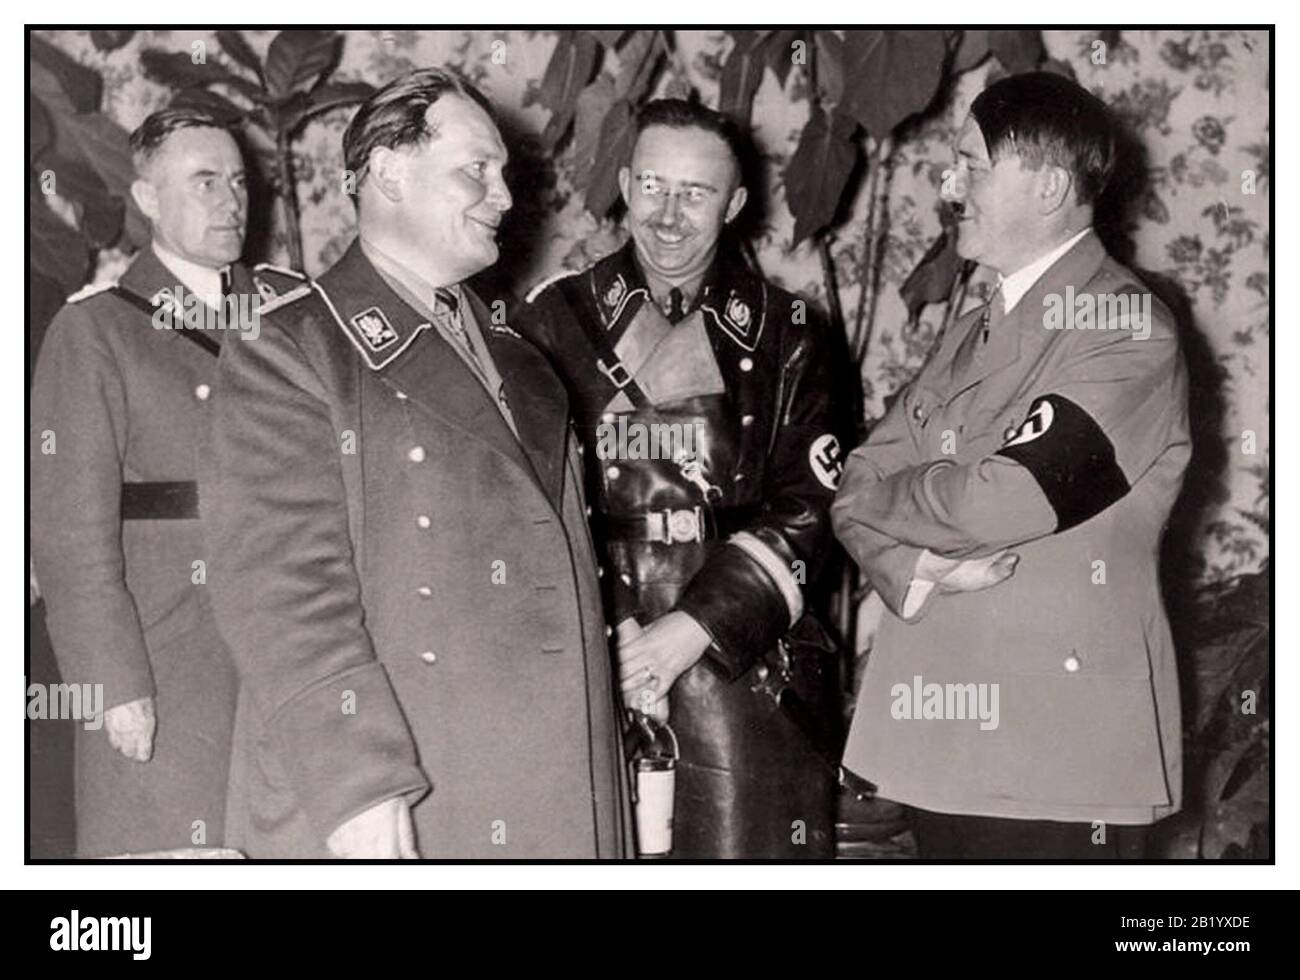 Nazi Archive 1940's Hermann Goering, Heinrich Himmler, and Adolf Hitle rchancellor of Germany in 1933 and then as Führer in 1934 smiling and laughing all wearing military uniform. Stock Photo